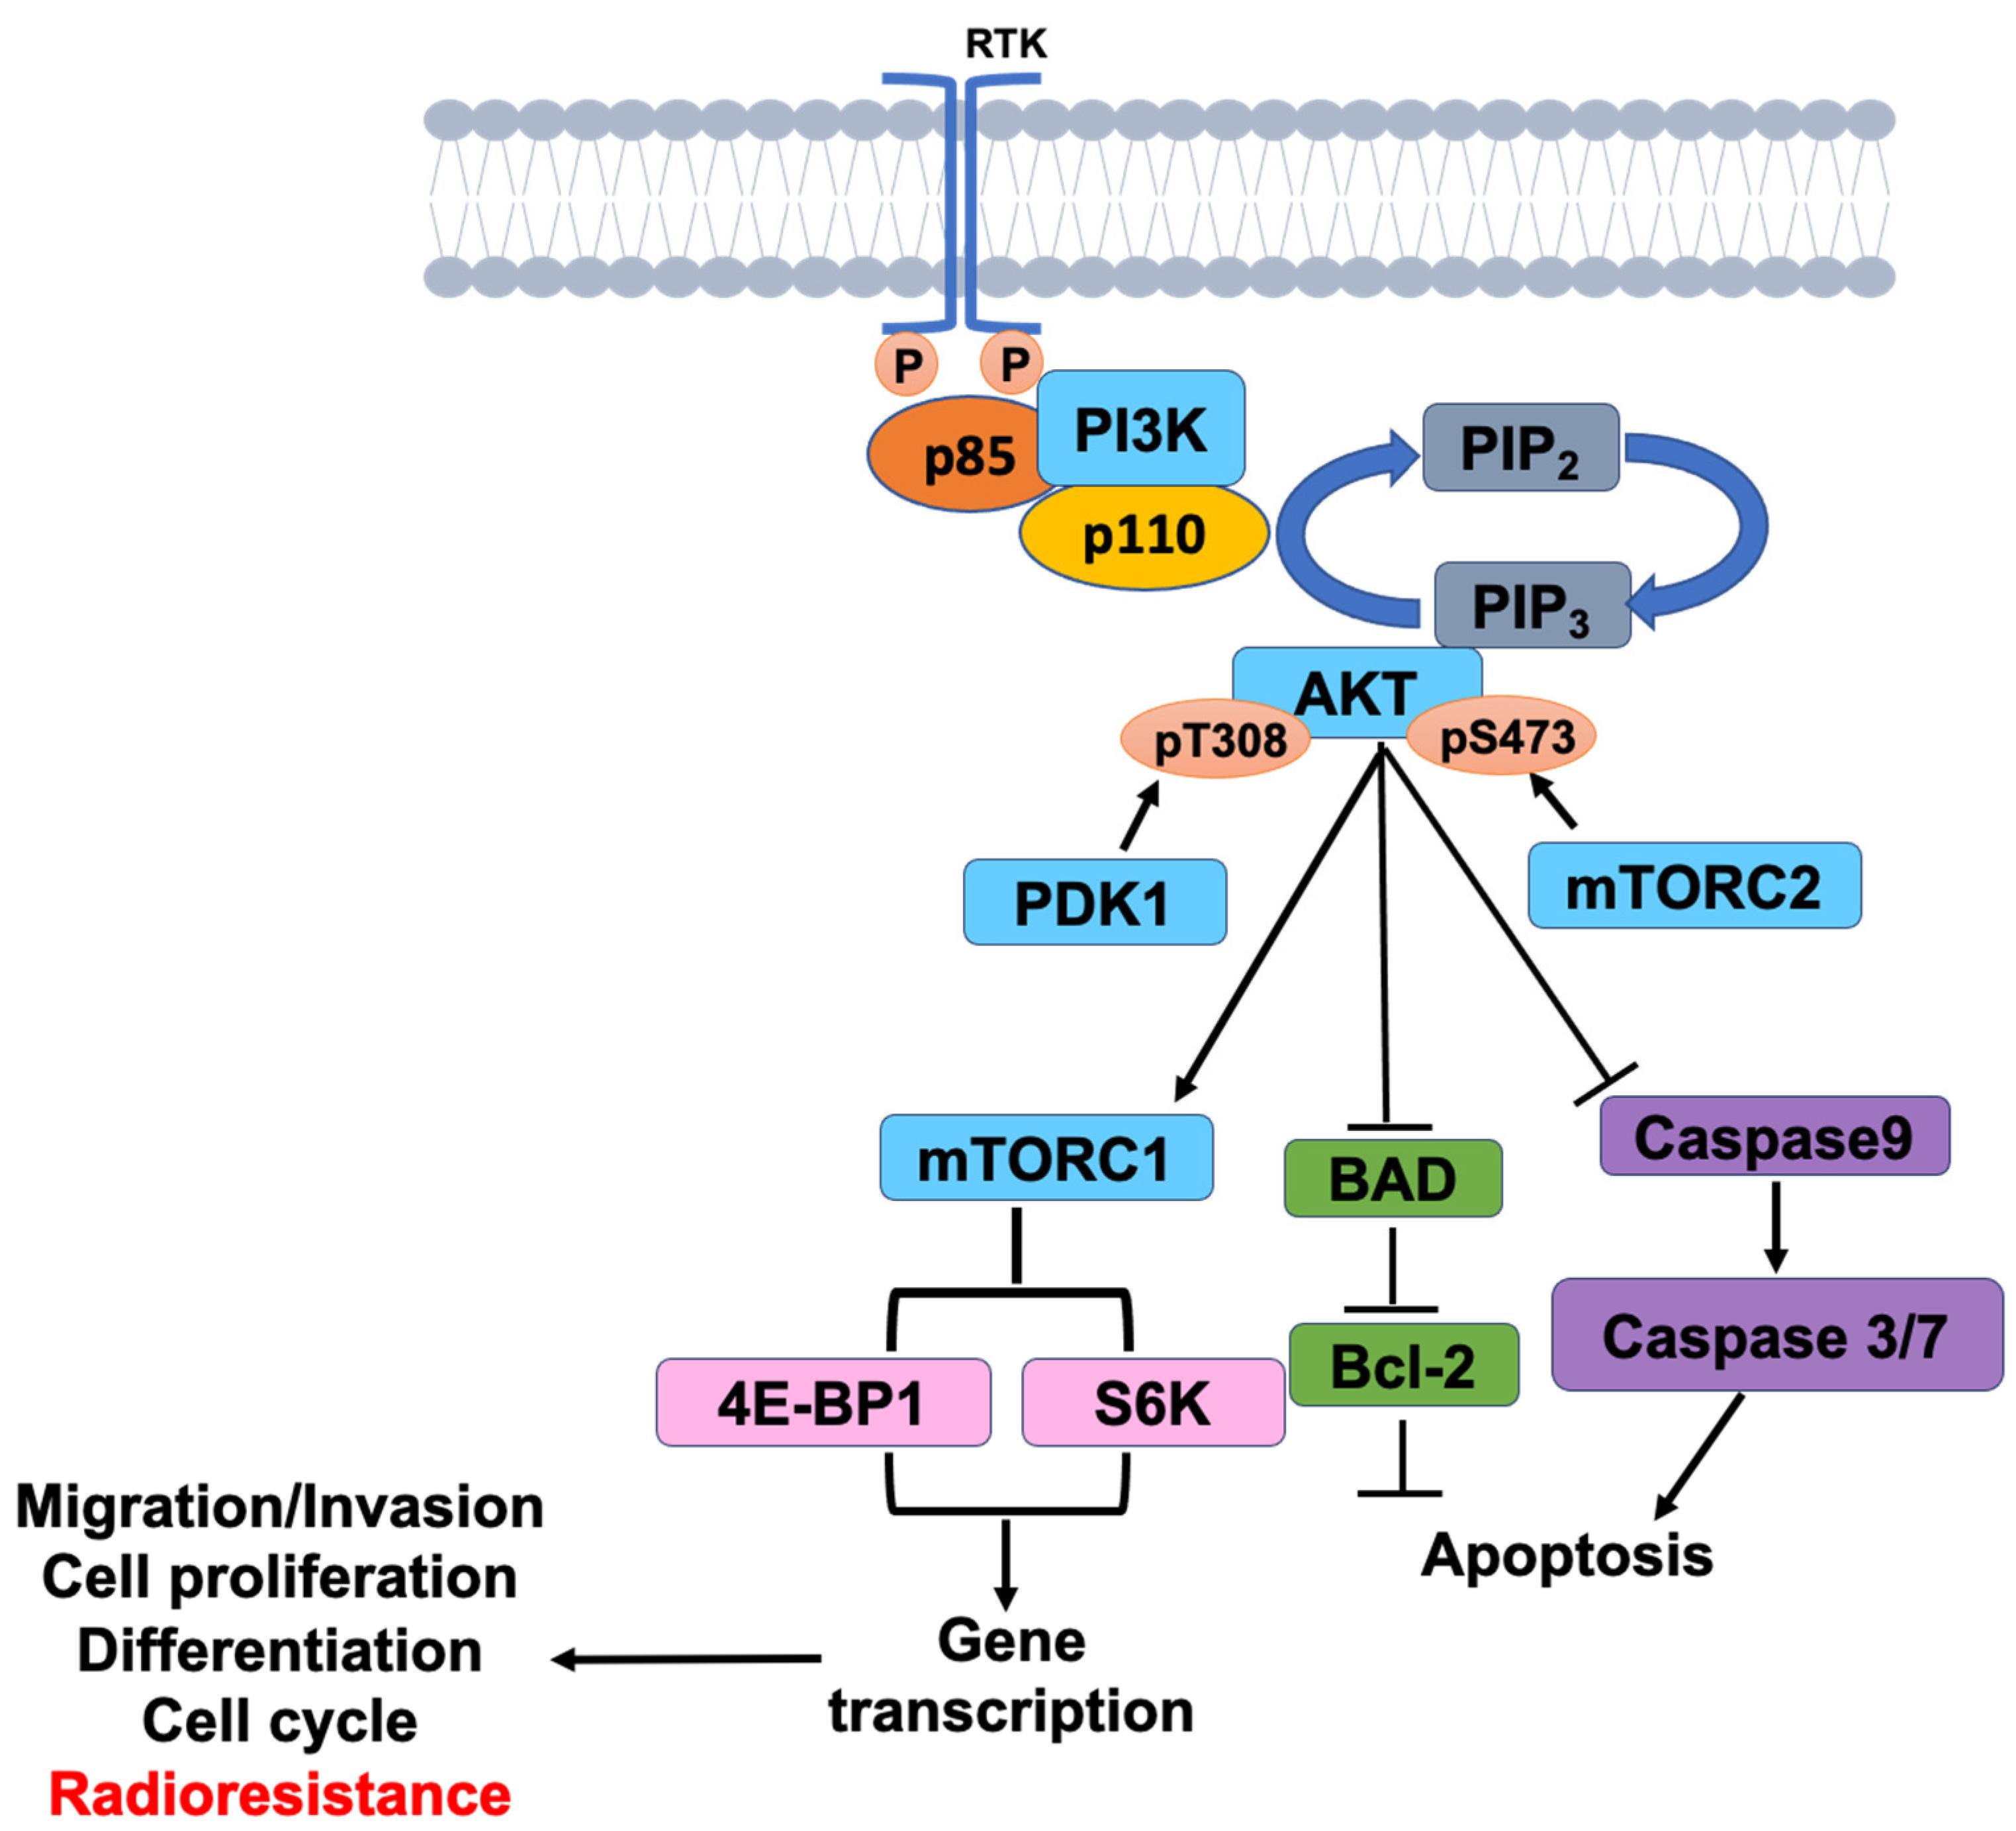 IJMS | Free Full-Text | Targeting PI3K/AKT/mTOR Signaling Pathway as a Radiosensitization in Head and Neck Squamous Cell Carcinomas